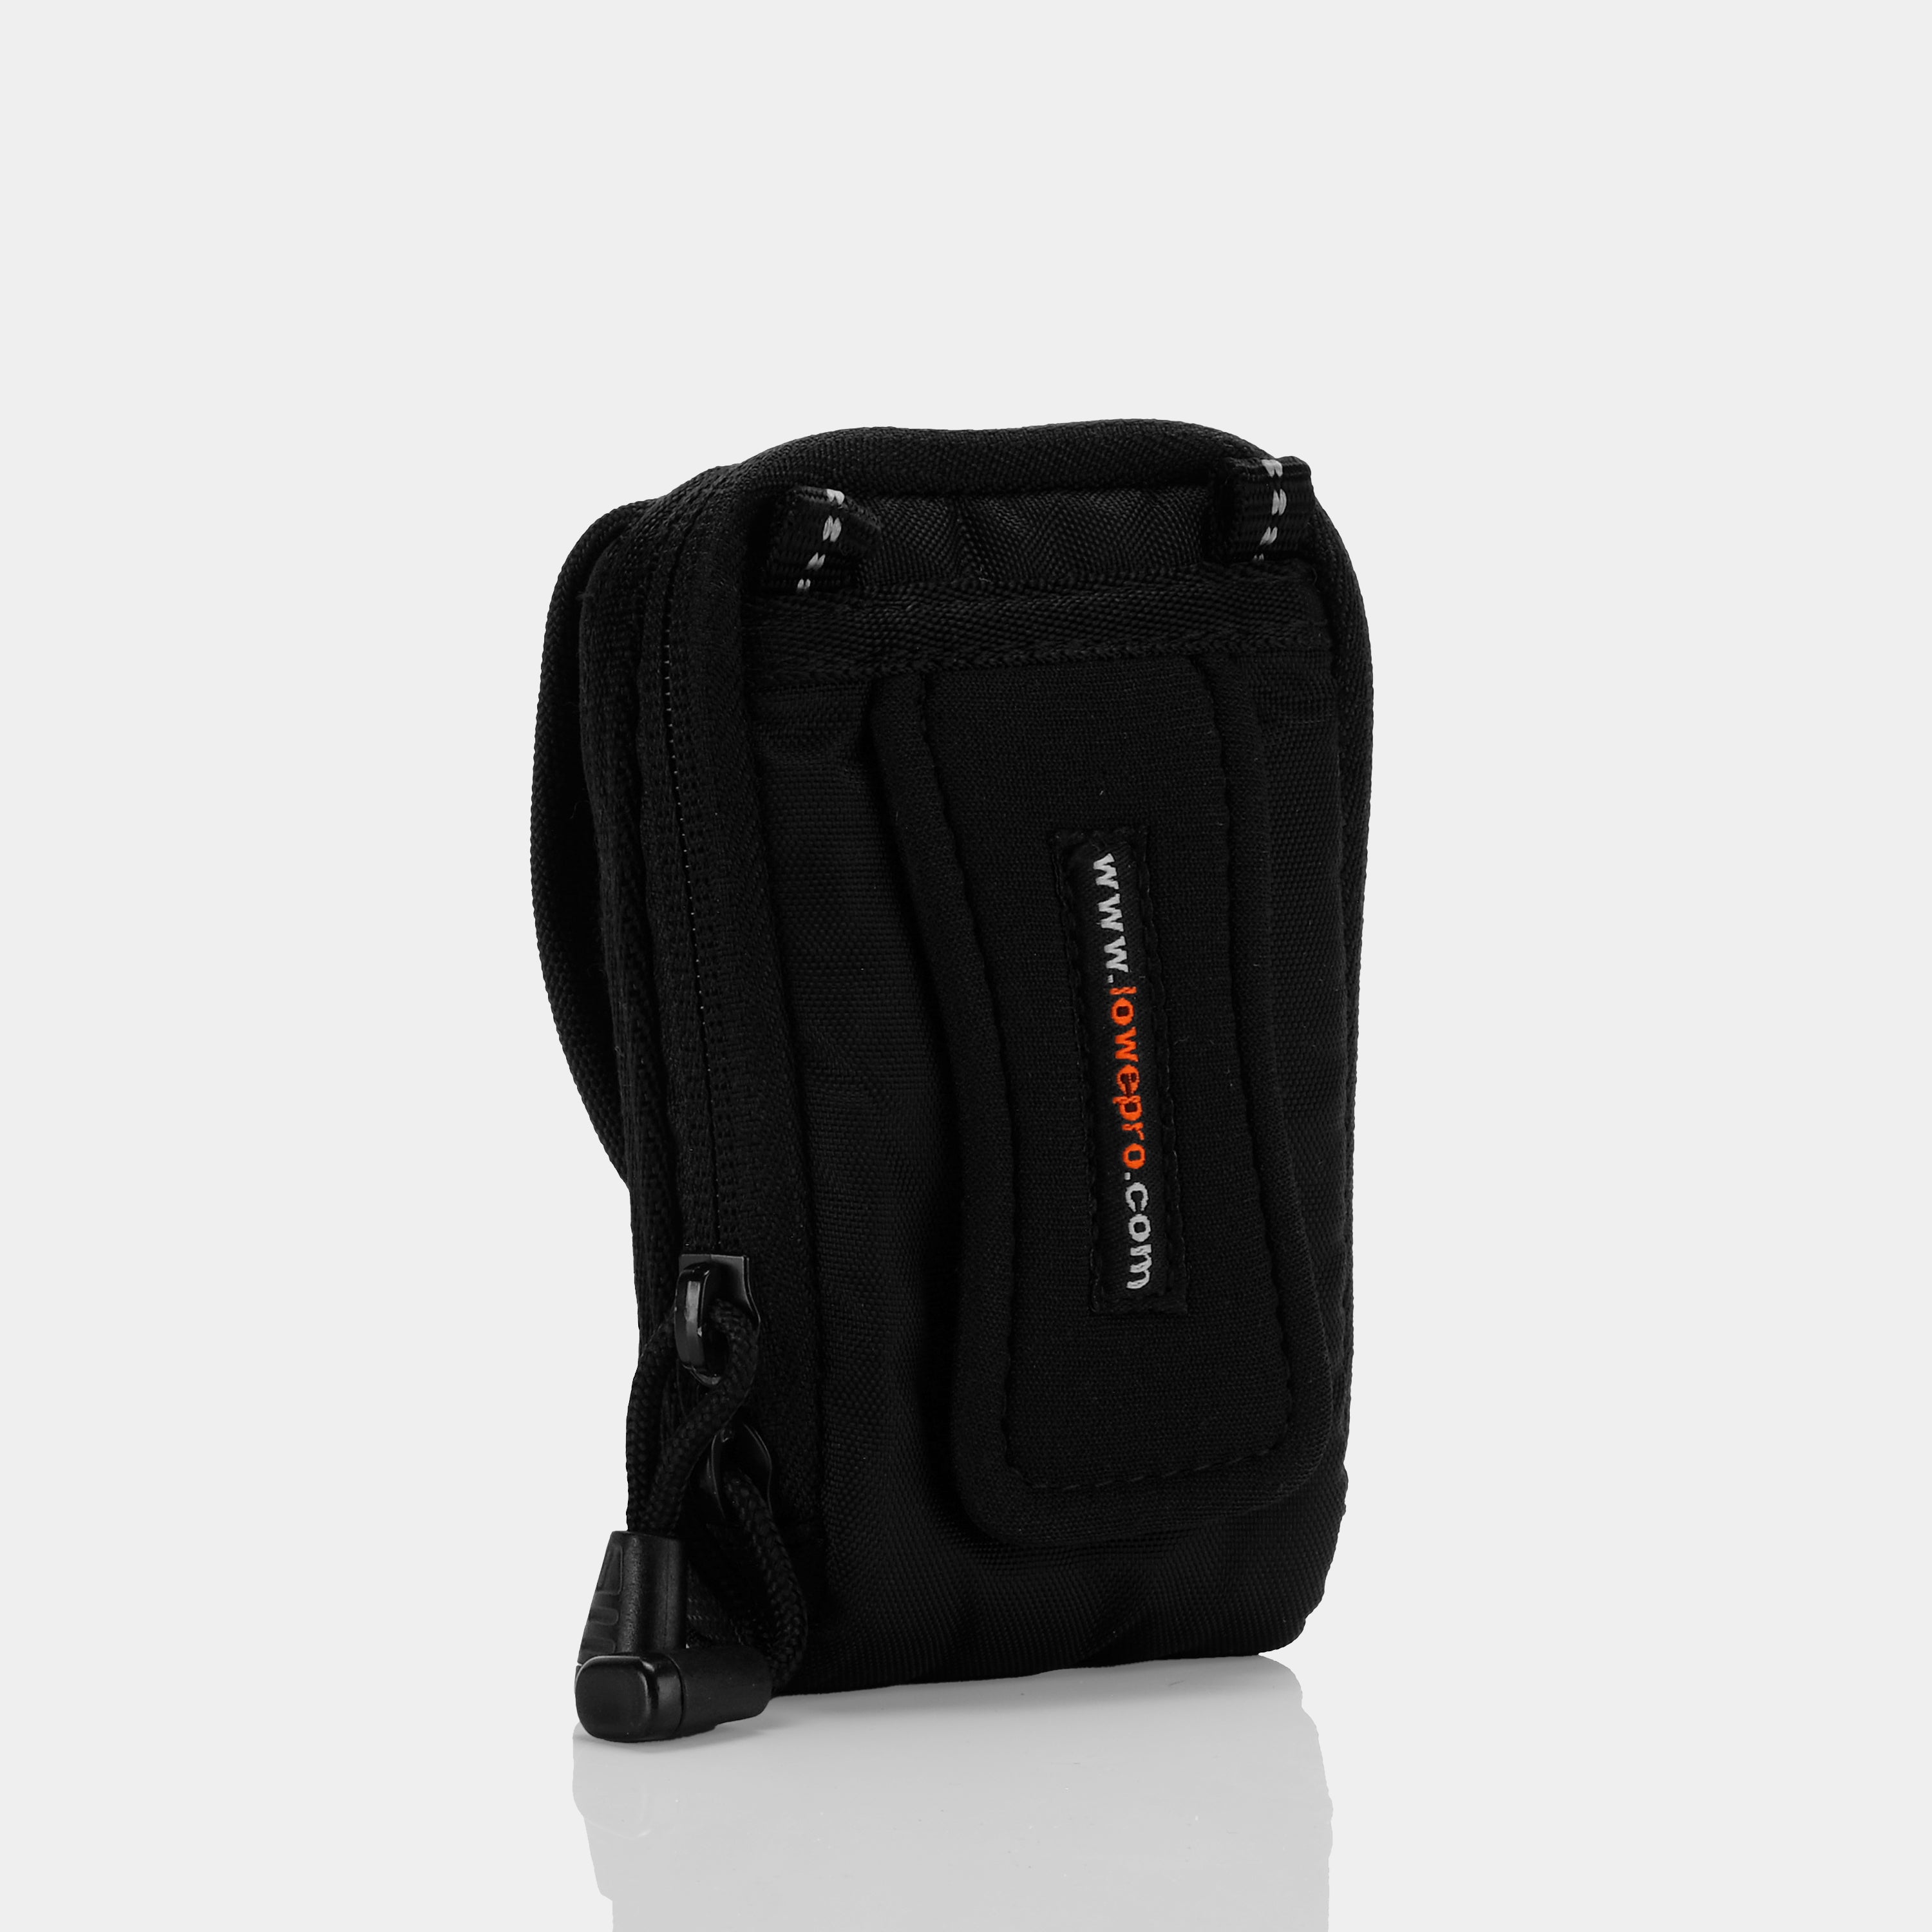 Lowepro Black Point and Shoot Camera Case